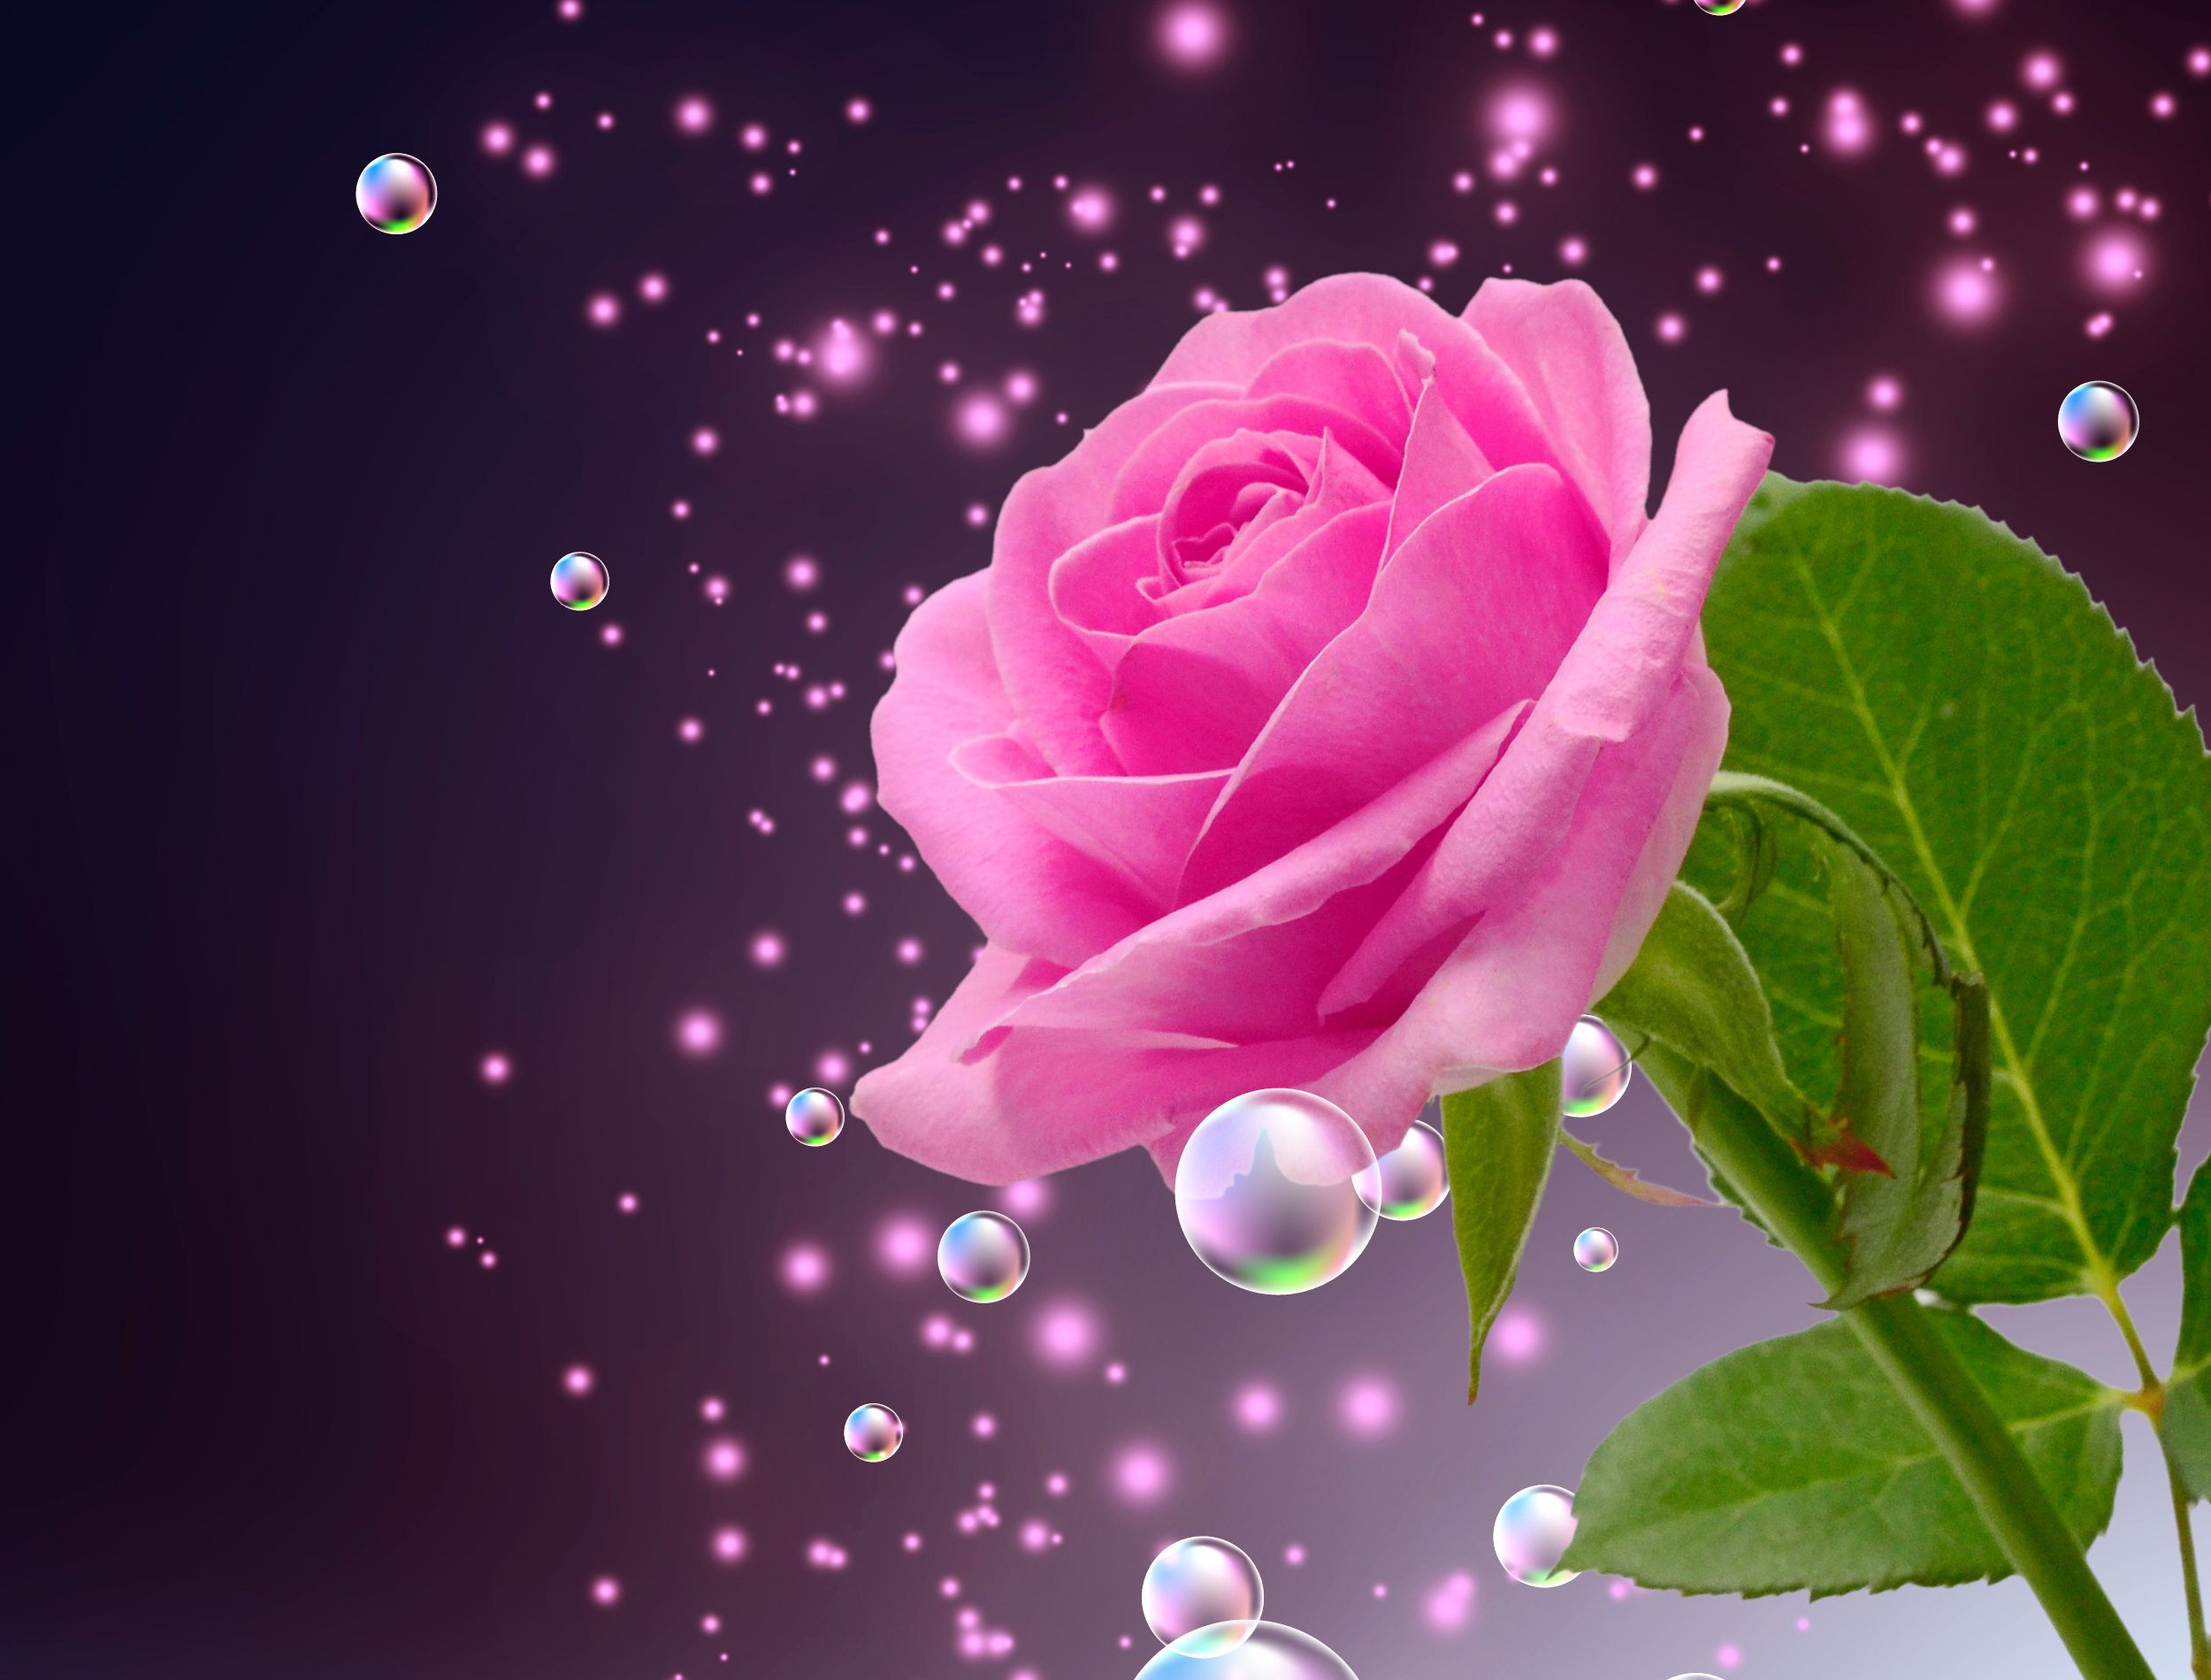 Colorful Roses Wallpaper Free Colorful Roses Background